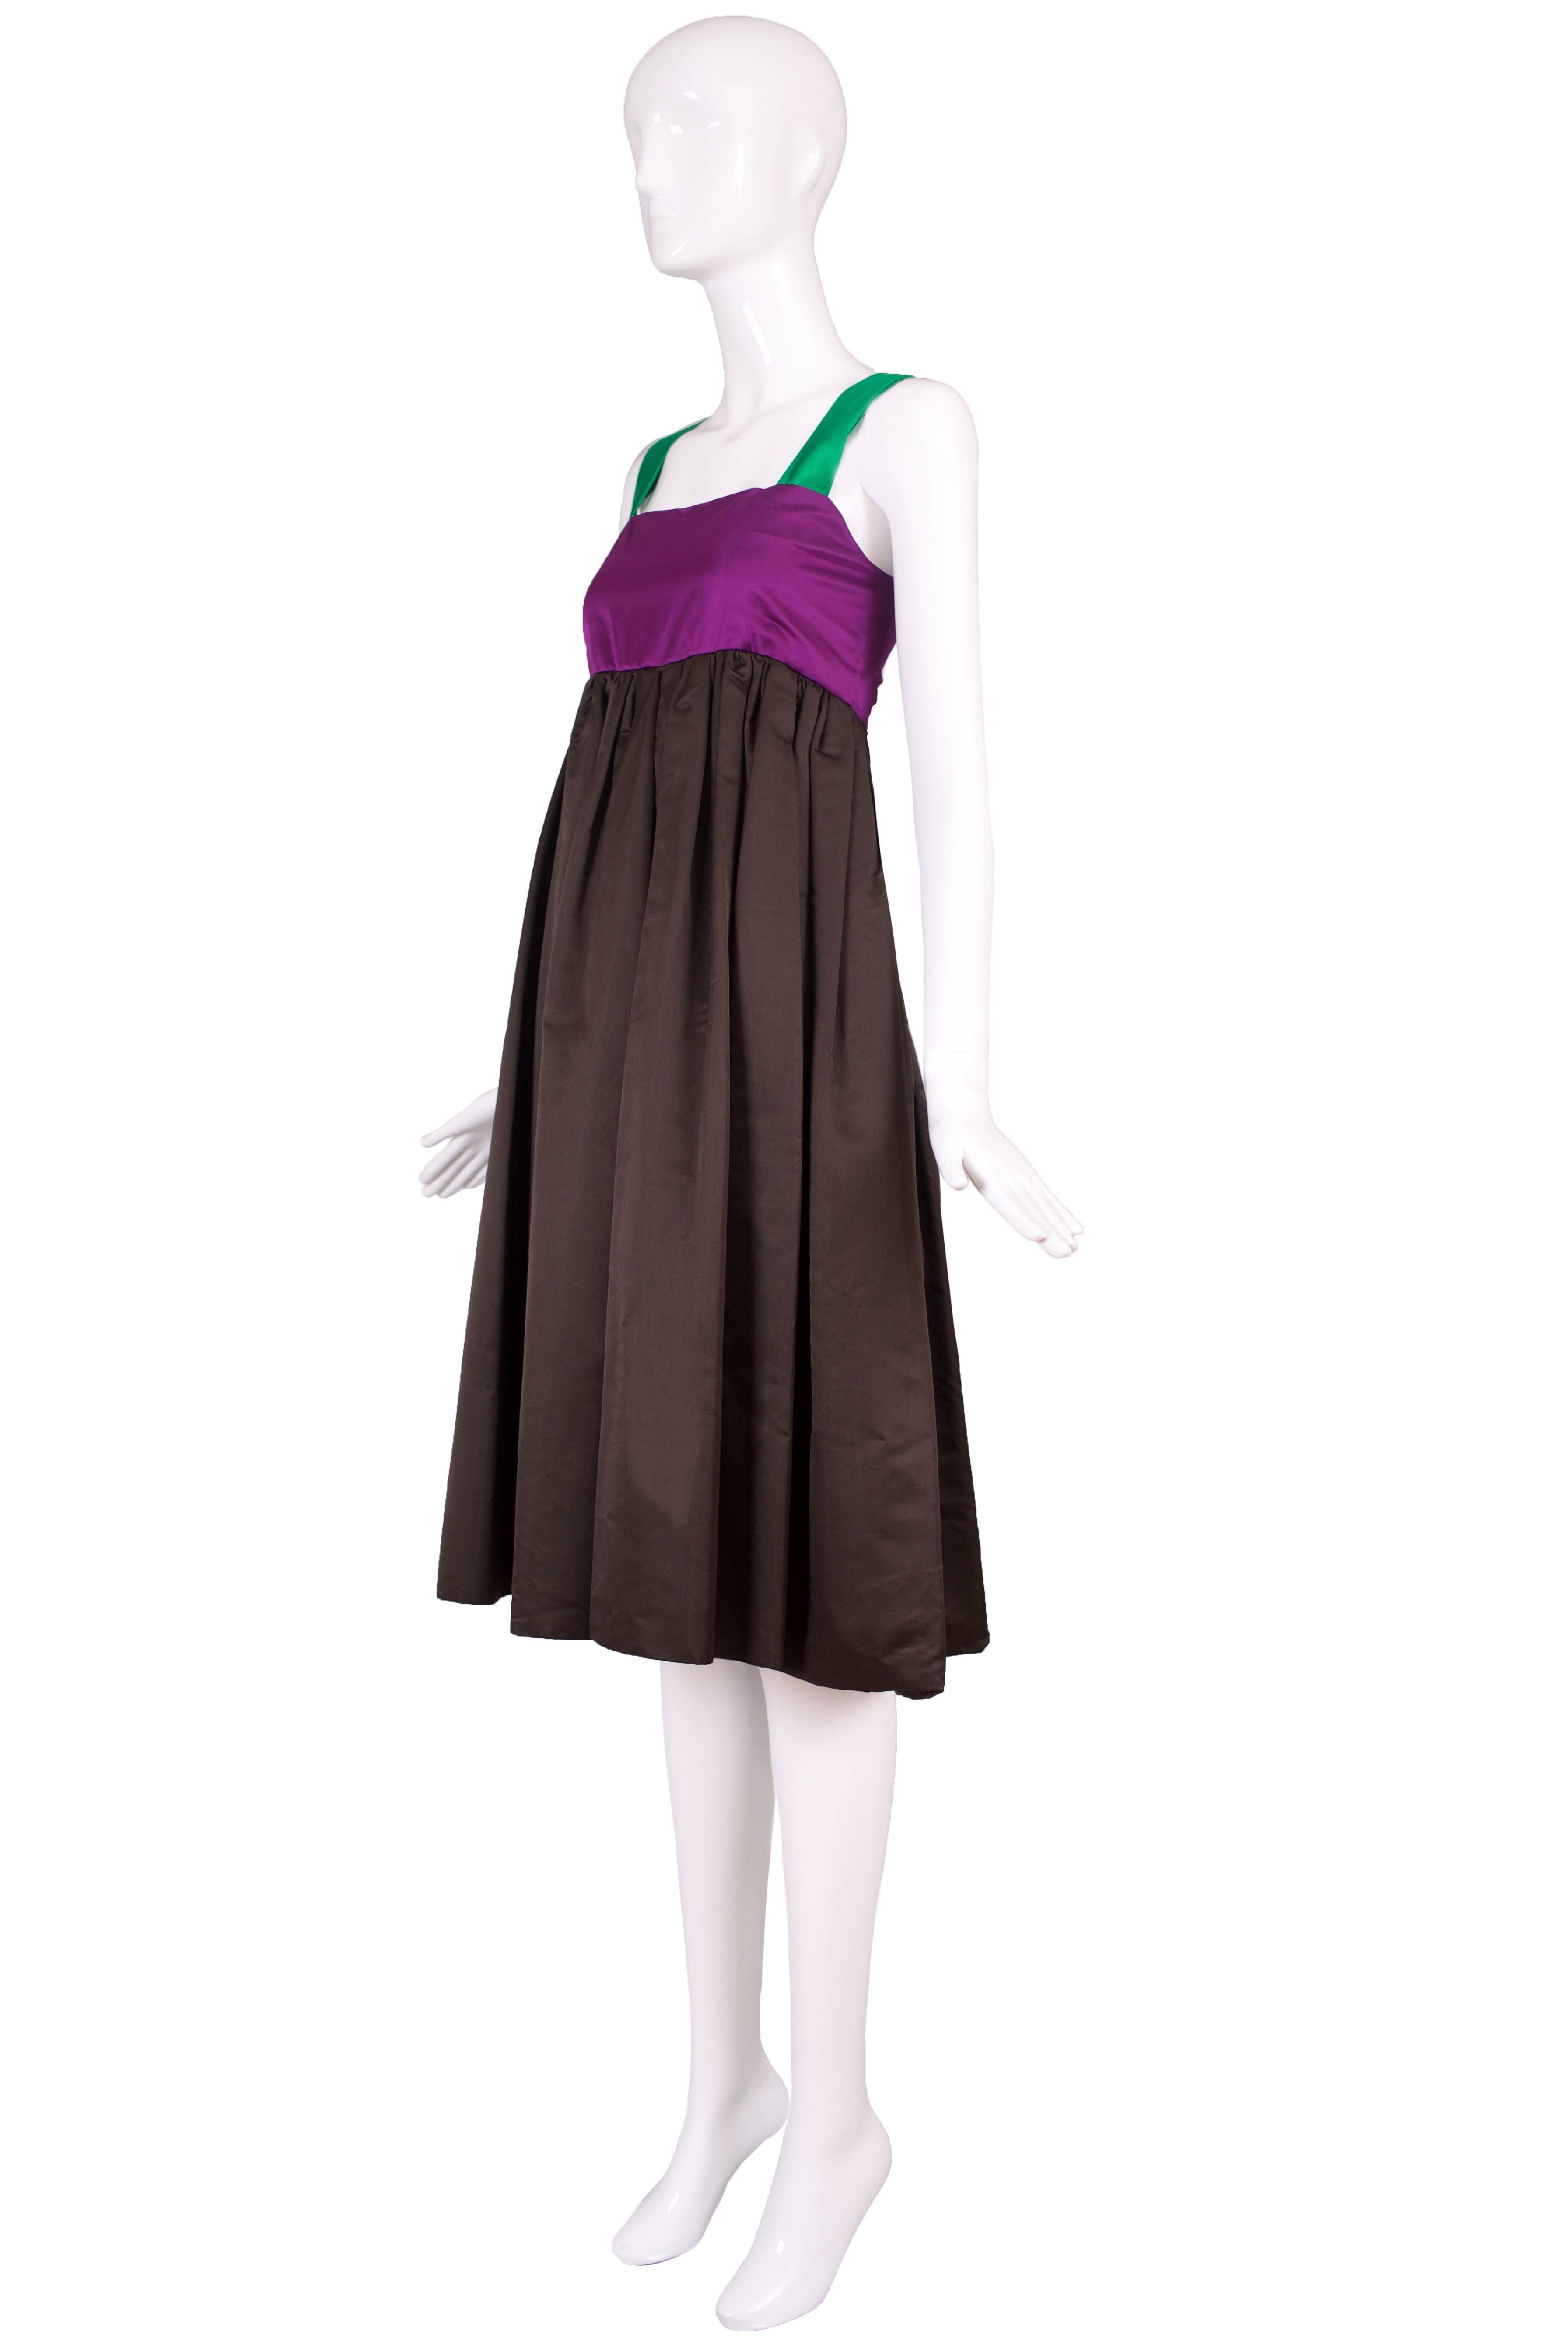 A Bill Blass purple, brown and green satin dress with a crinoline under the skirt. No size tag - so please consult measurements. In excellent condition.
MEASUREMENTS:
Bust - 34